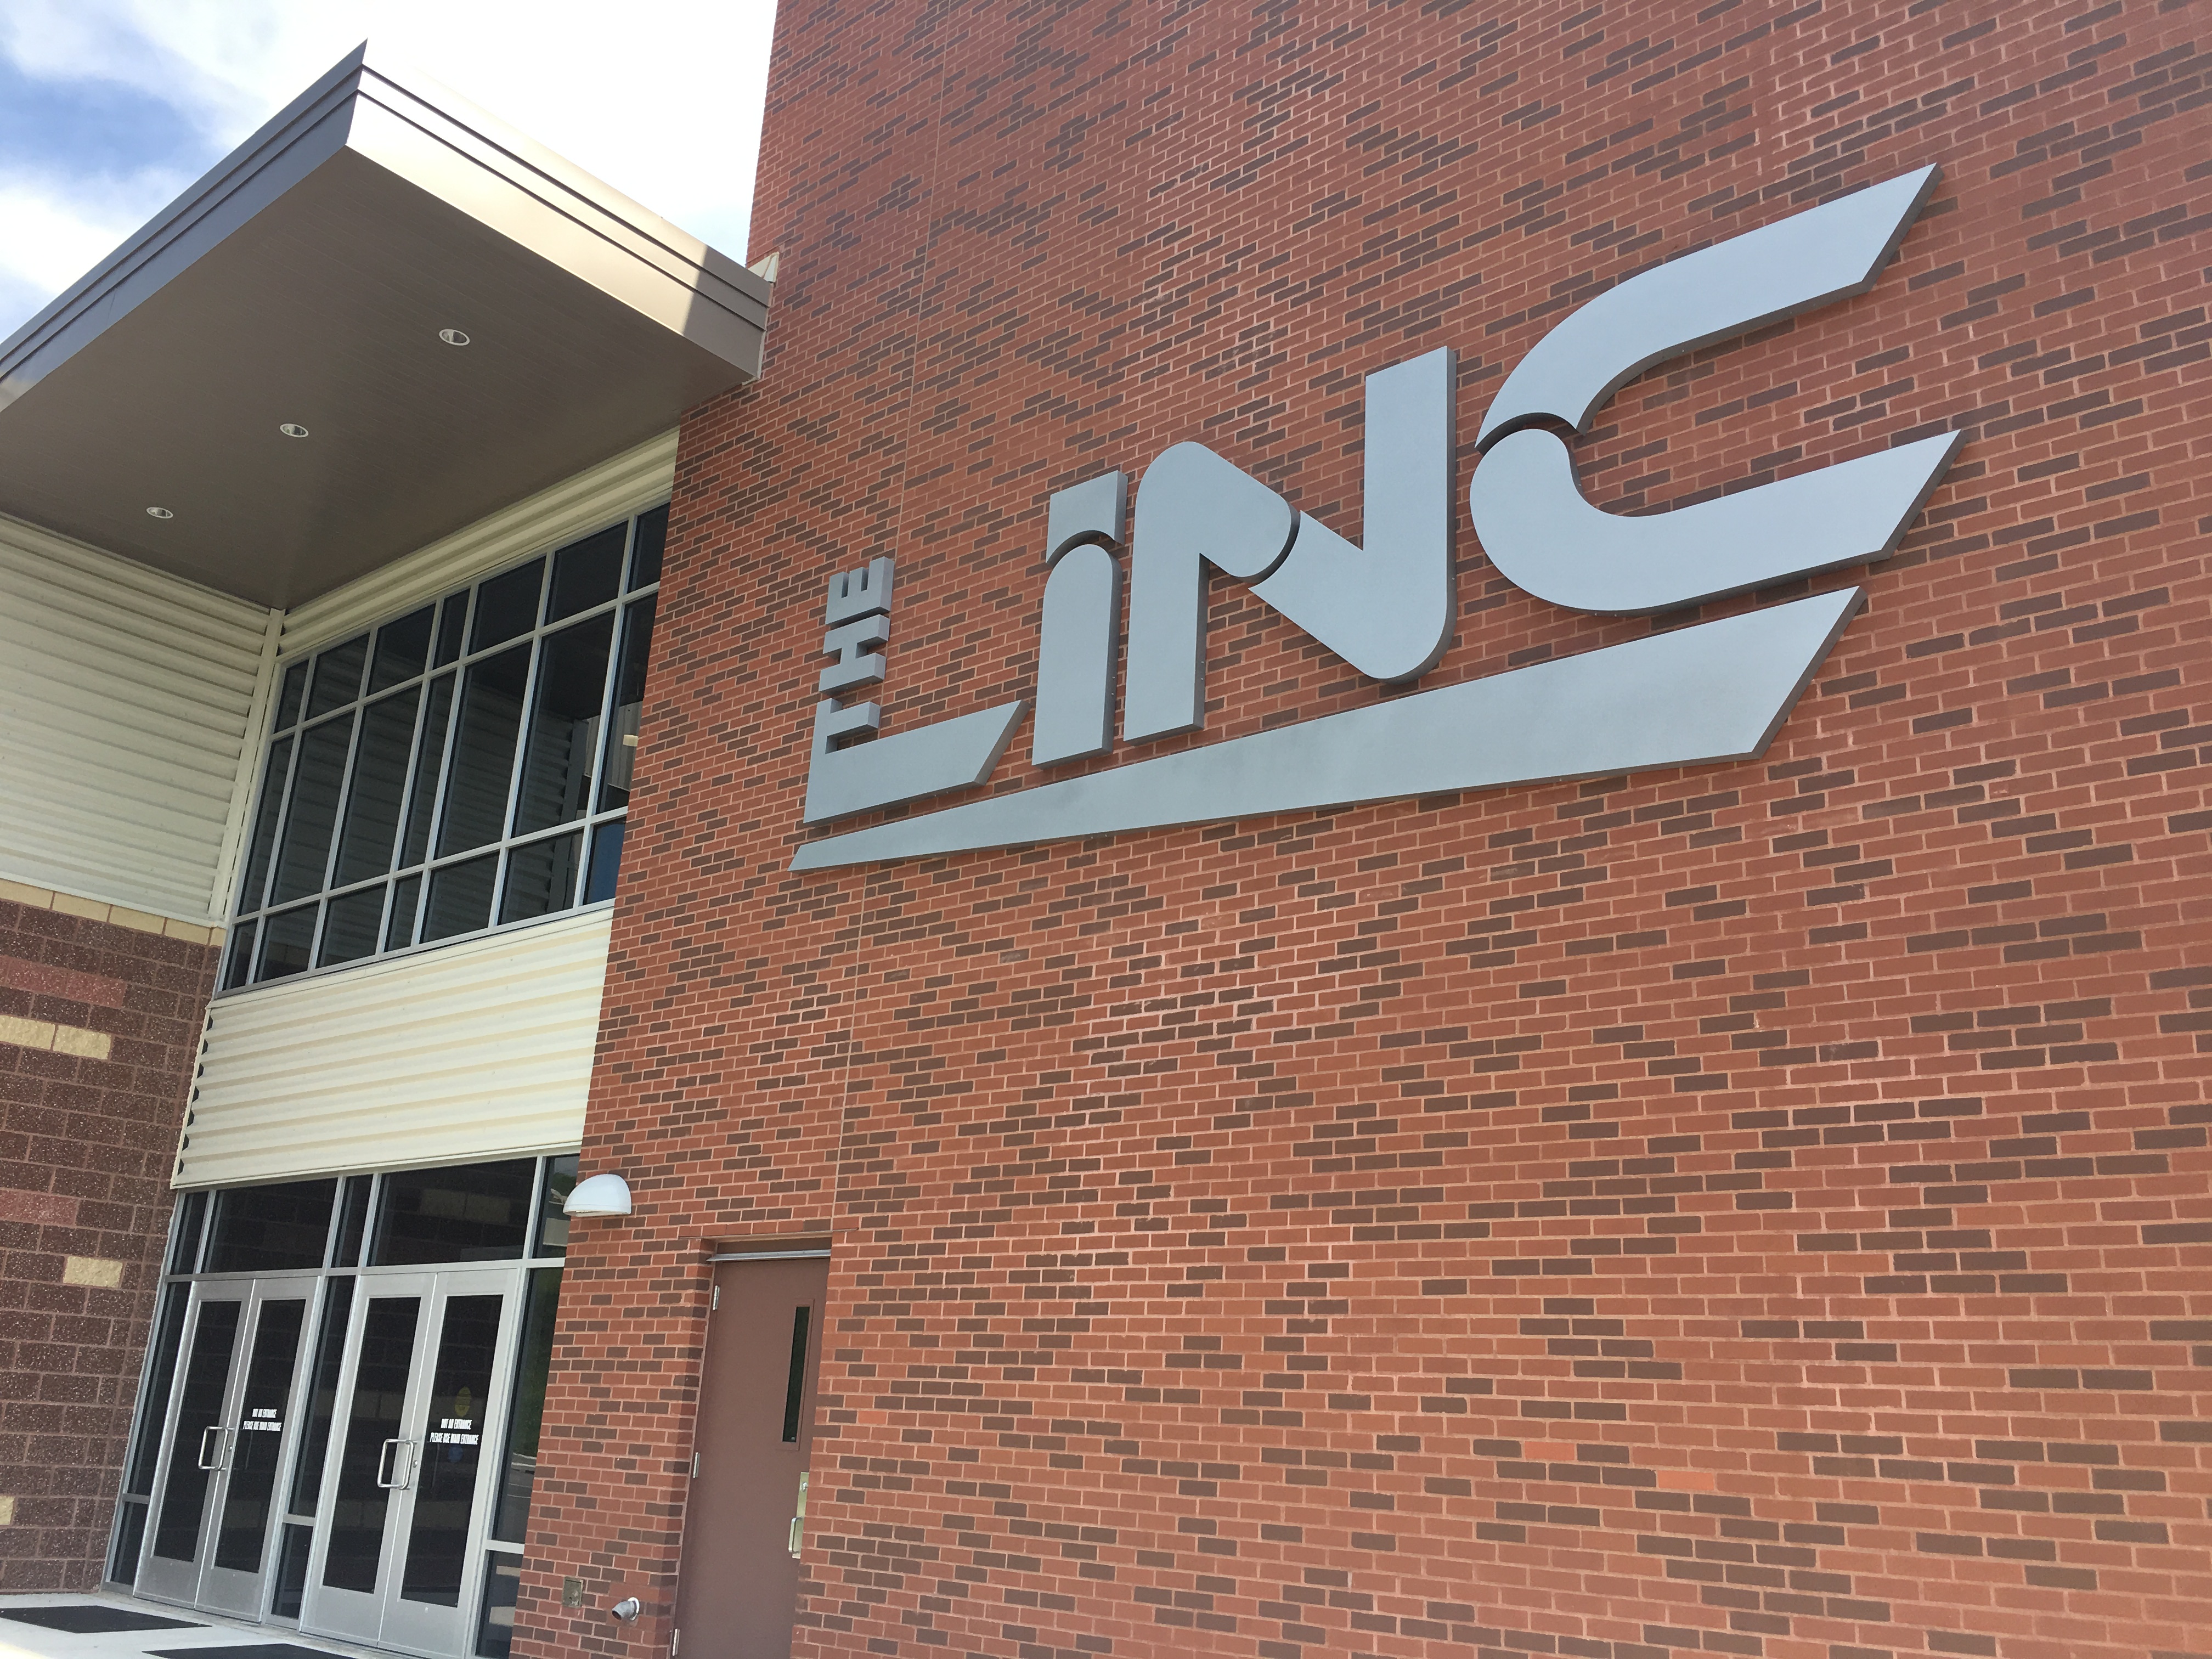 The Linc Recreation and Wellness Center